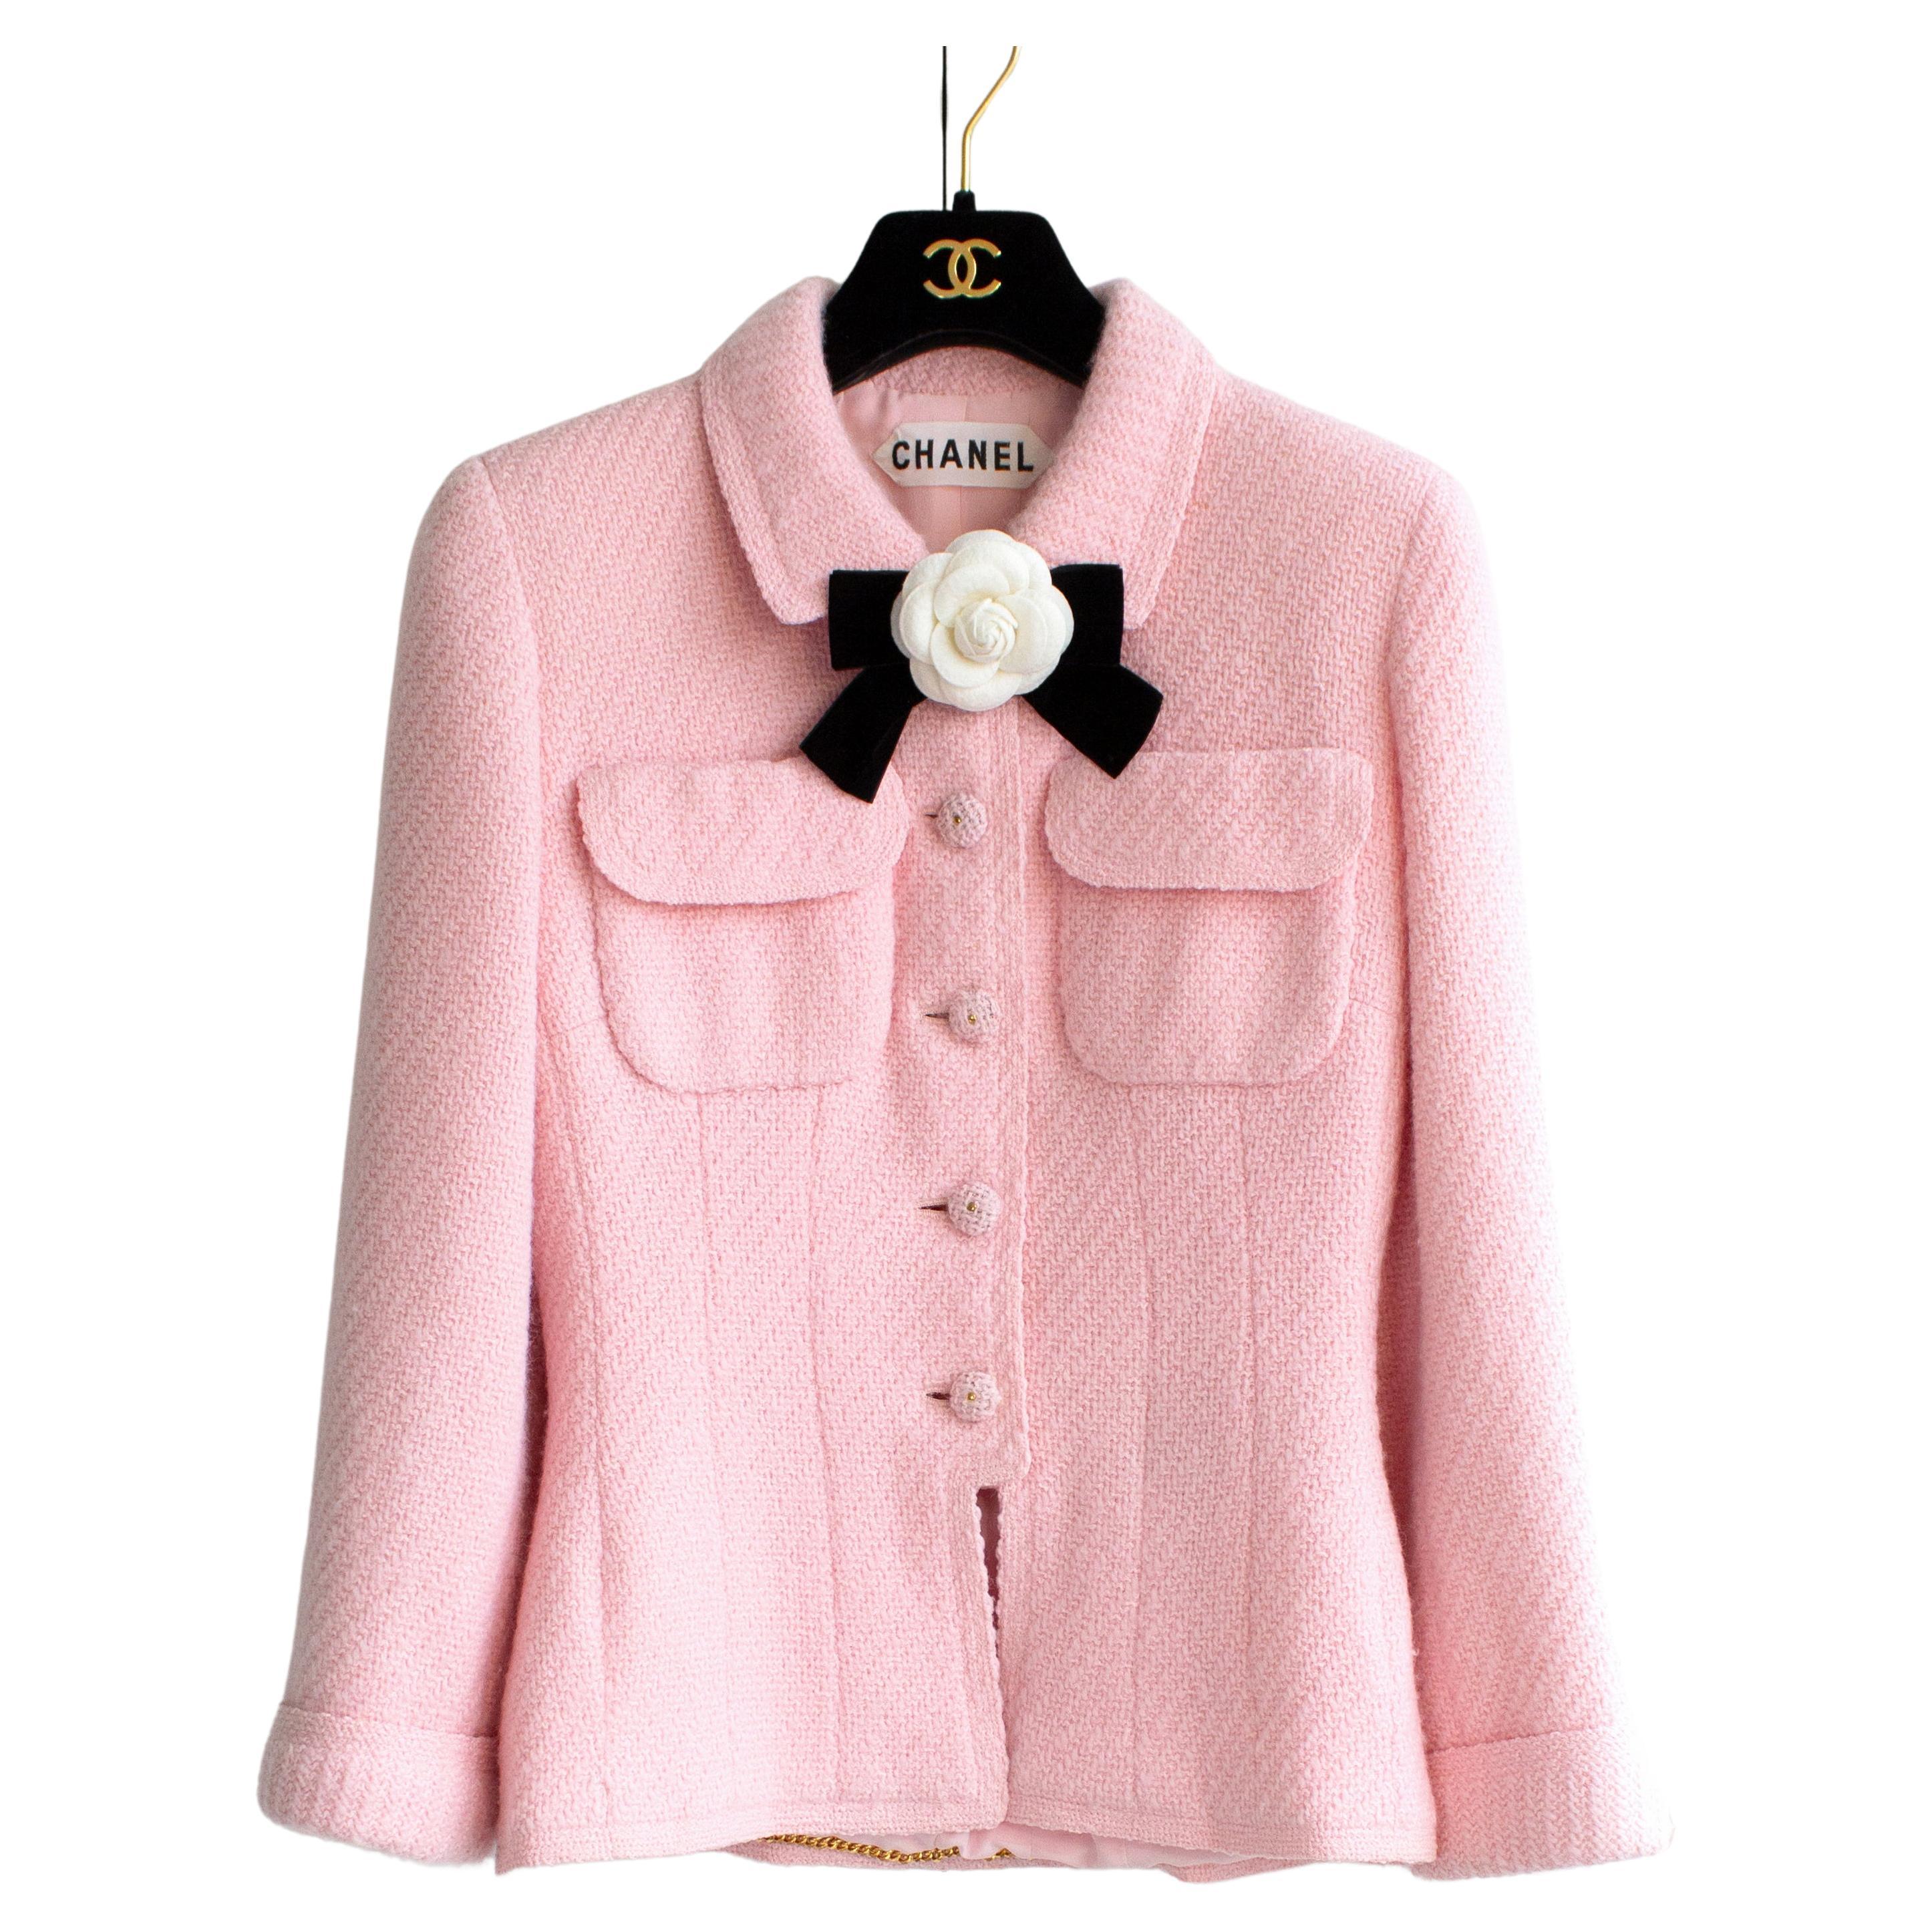 Chanel Vintage Spring/Summer 1995 Haute Couture Pink Tweed Jacket For Sale